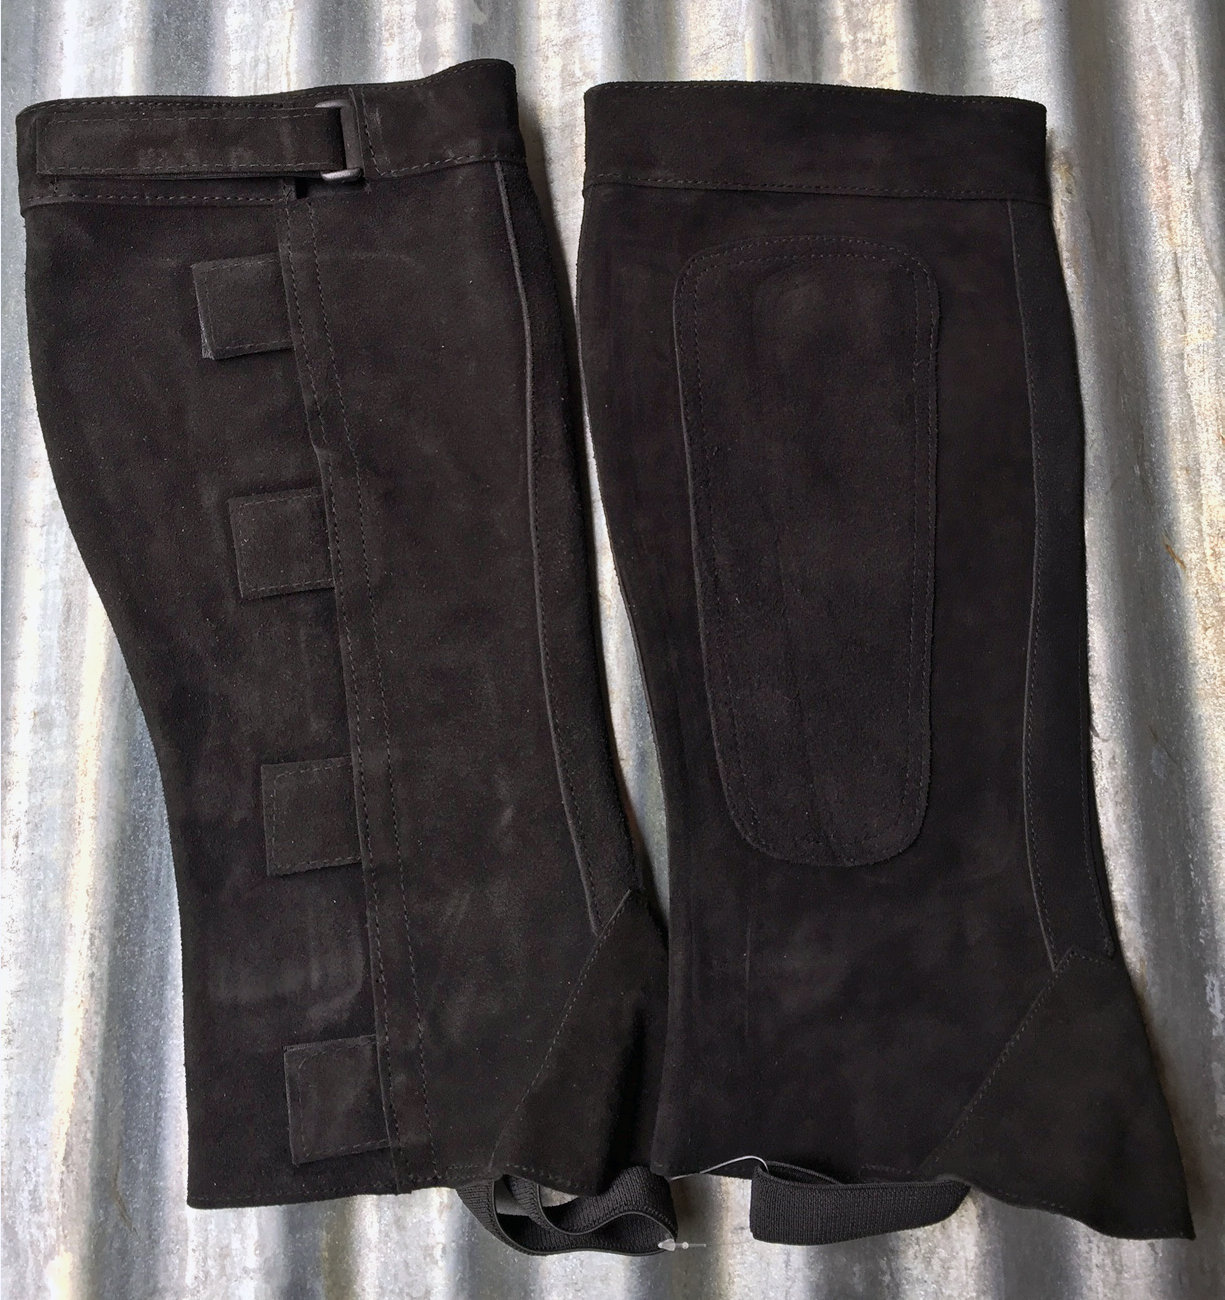 Half Chaps - Easy On Suede Black/XLG